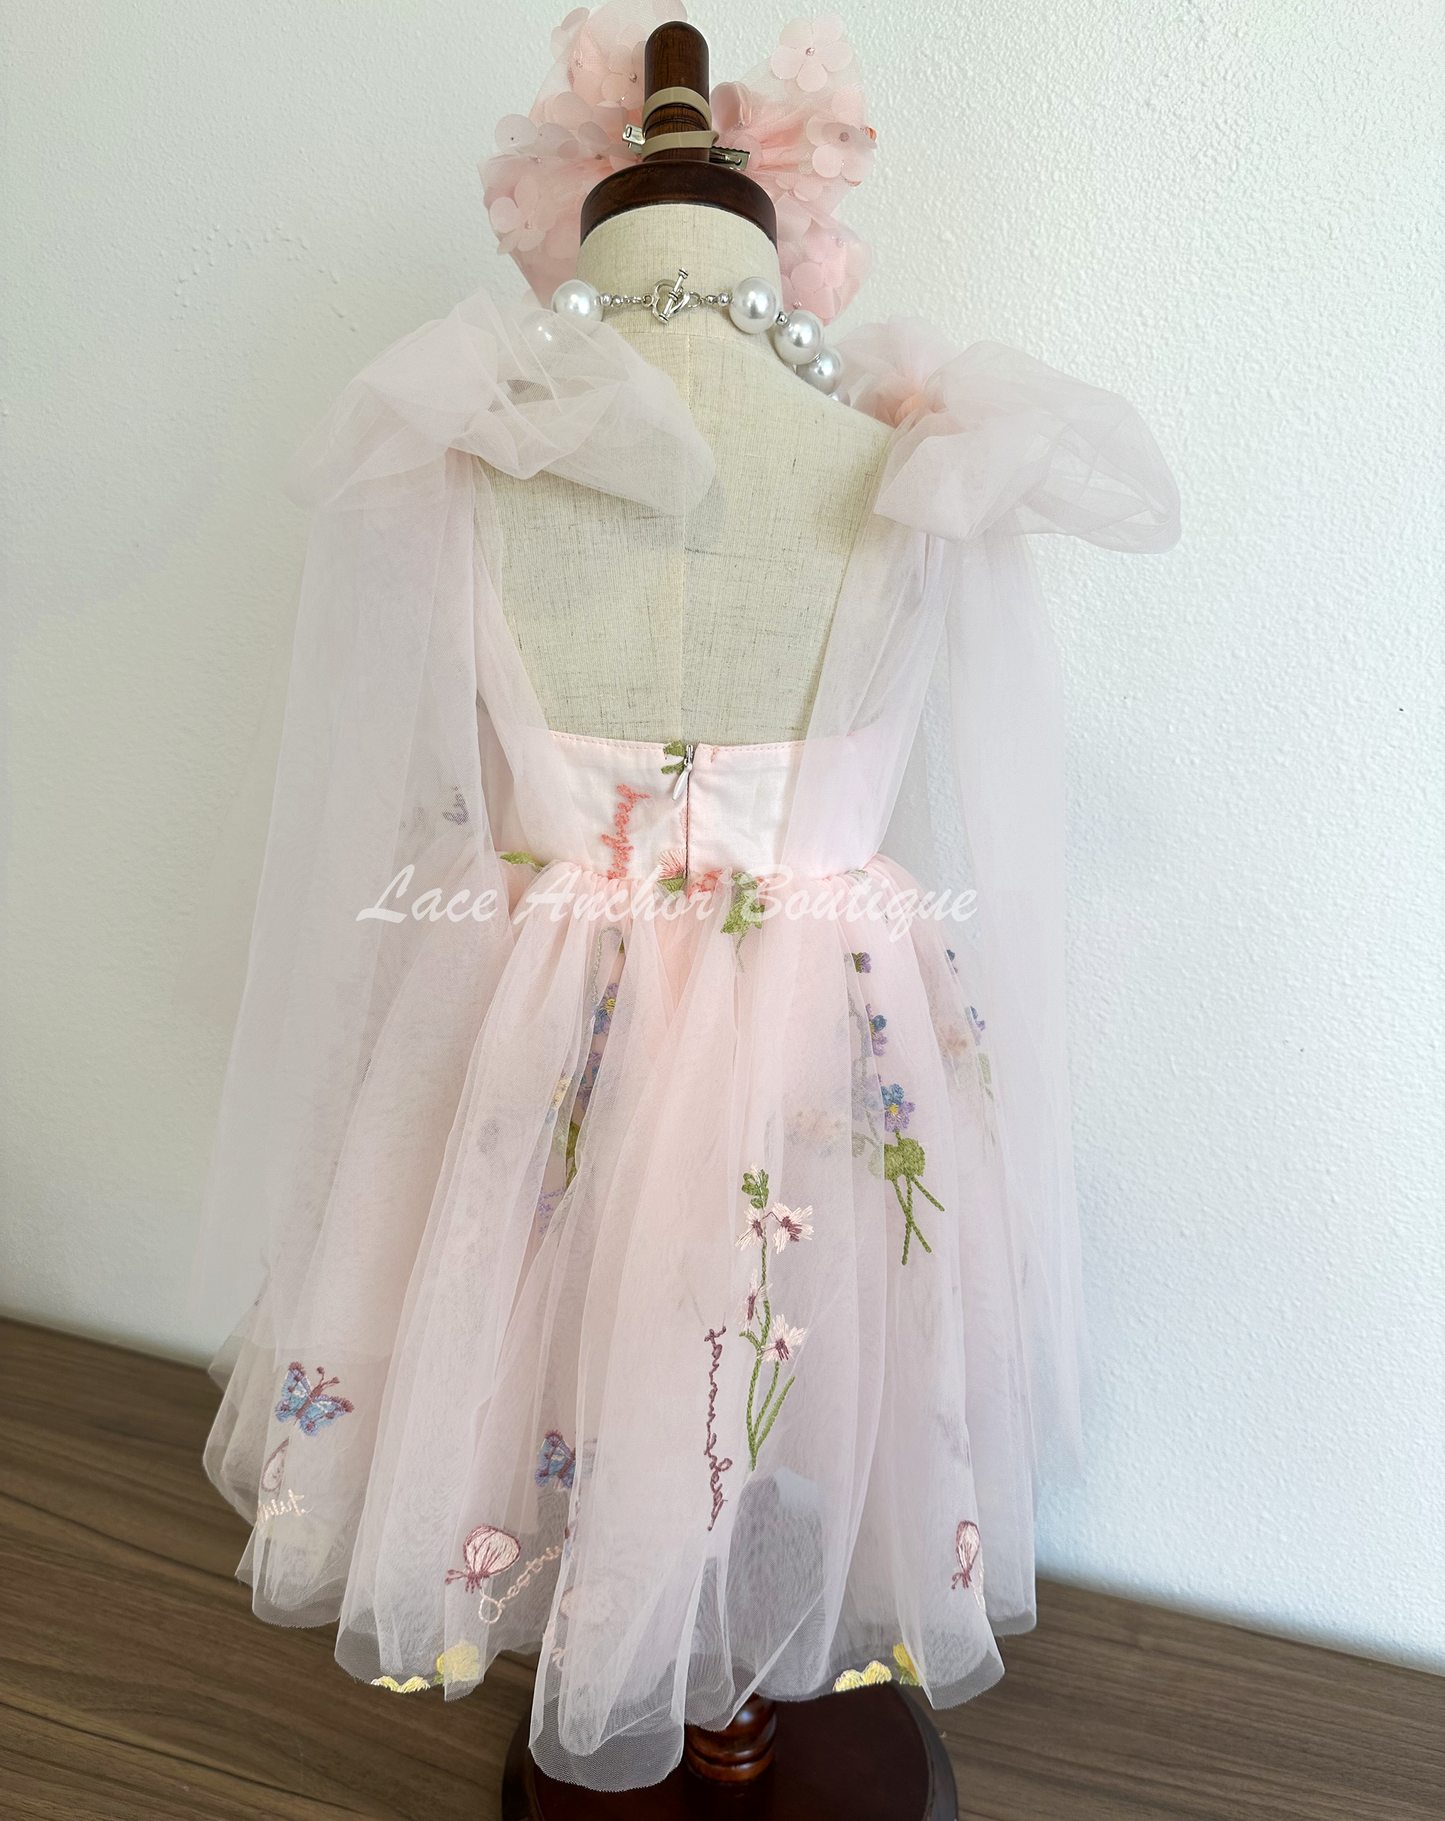 toddler youth puffy tied shoulder flower girl dress with large tied bow tied at waist. Outfits in light blush pink with emboridered floral print.